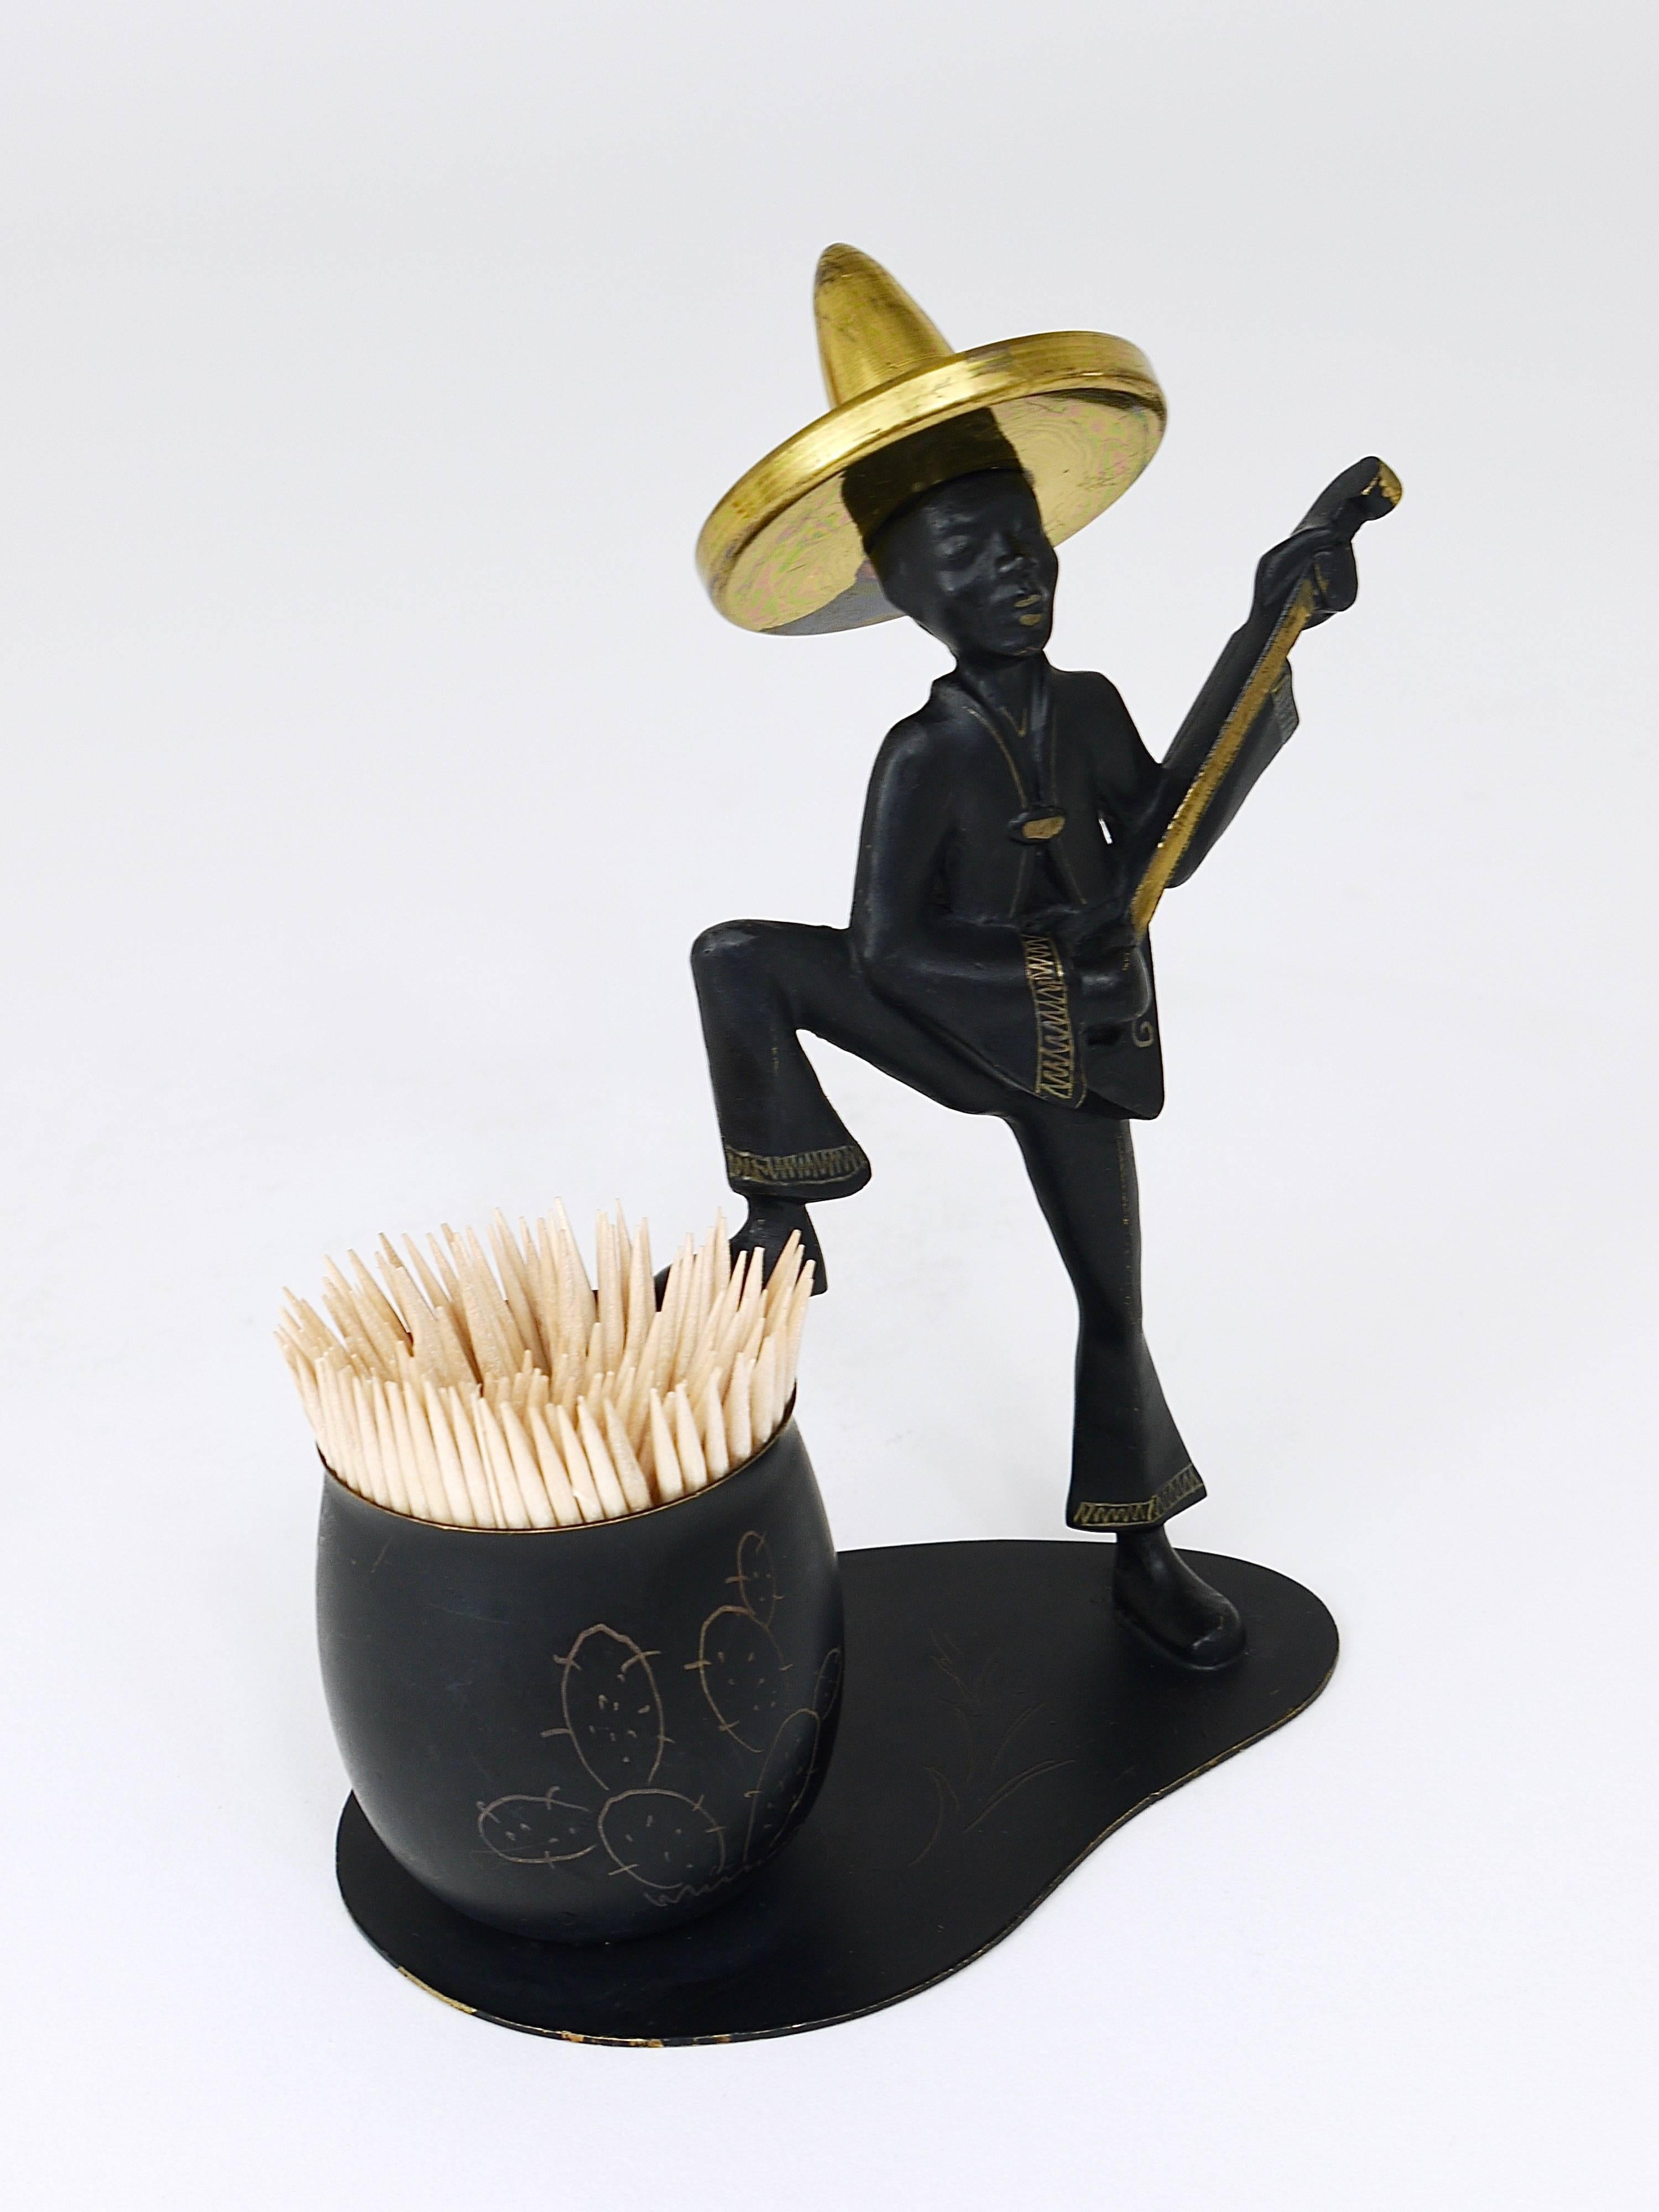 20th Century Mexican Playing Guitar Sculptural Toothpick Stand, Hertha Baller, Austria, 1950s